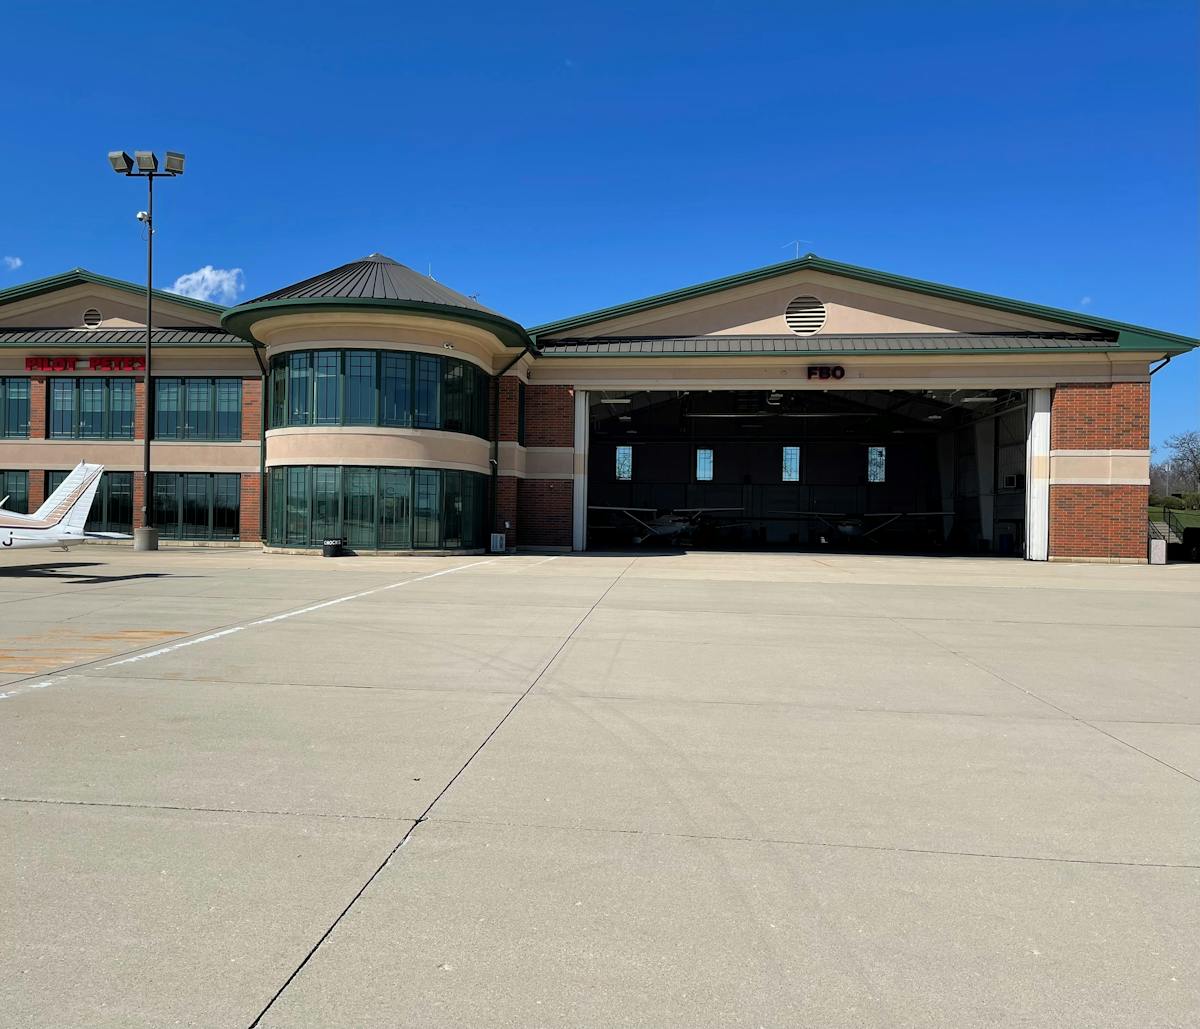 The Schaumburg FBO facility comprises 13,952-square-feet of customer-centric accommodations, housing a passenger terminal, an executive conference room with full A/V capabilities and seating for 20, a lounge, and hangar space able to accommodate up to medium-sized aircraft.